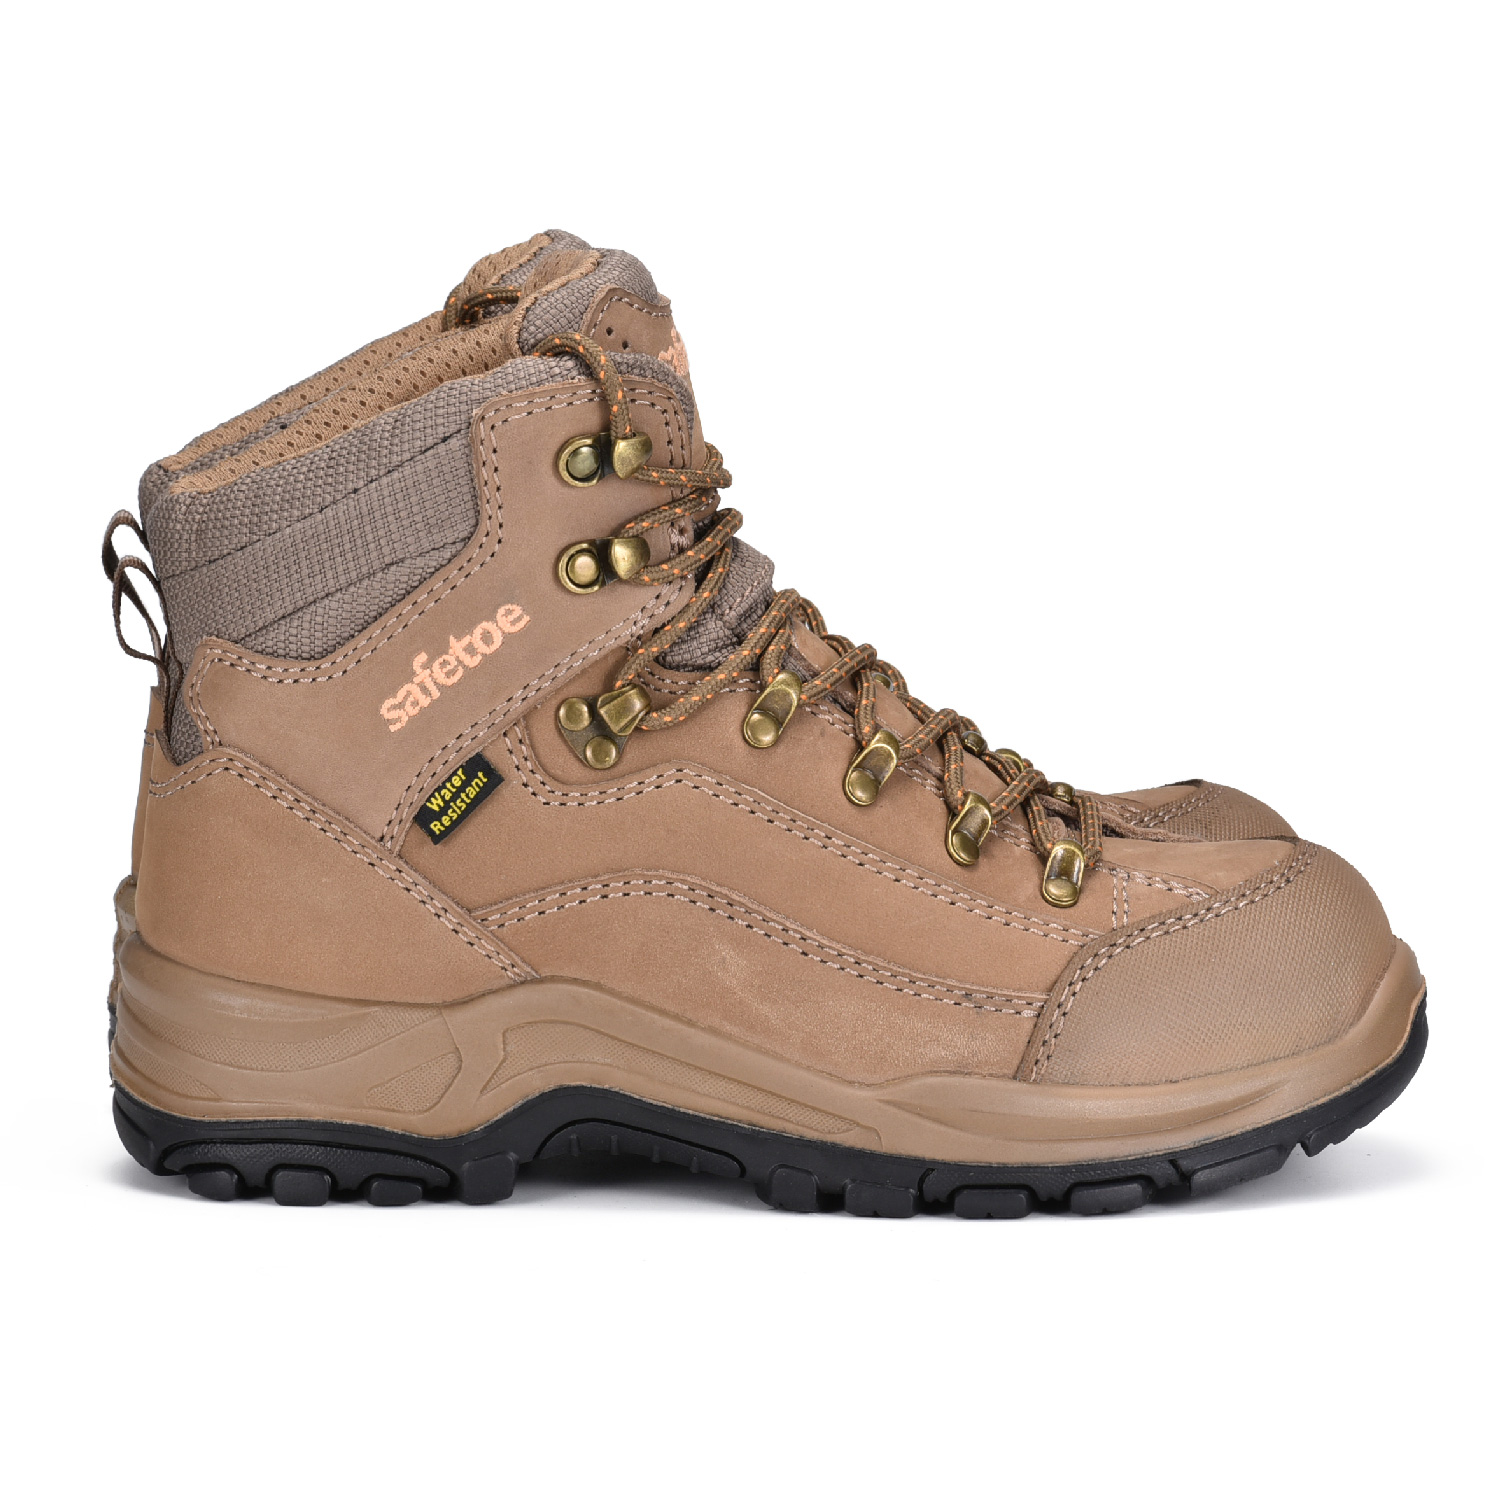 Waterproof Membrane Women Work Boots with Composite Toe M-8567